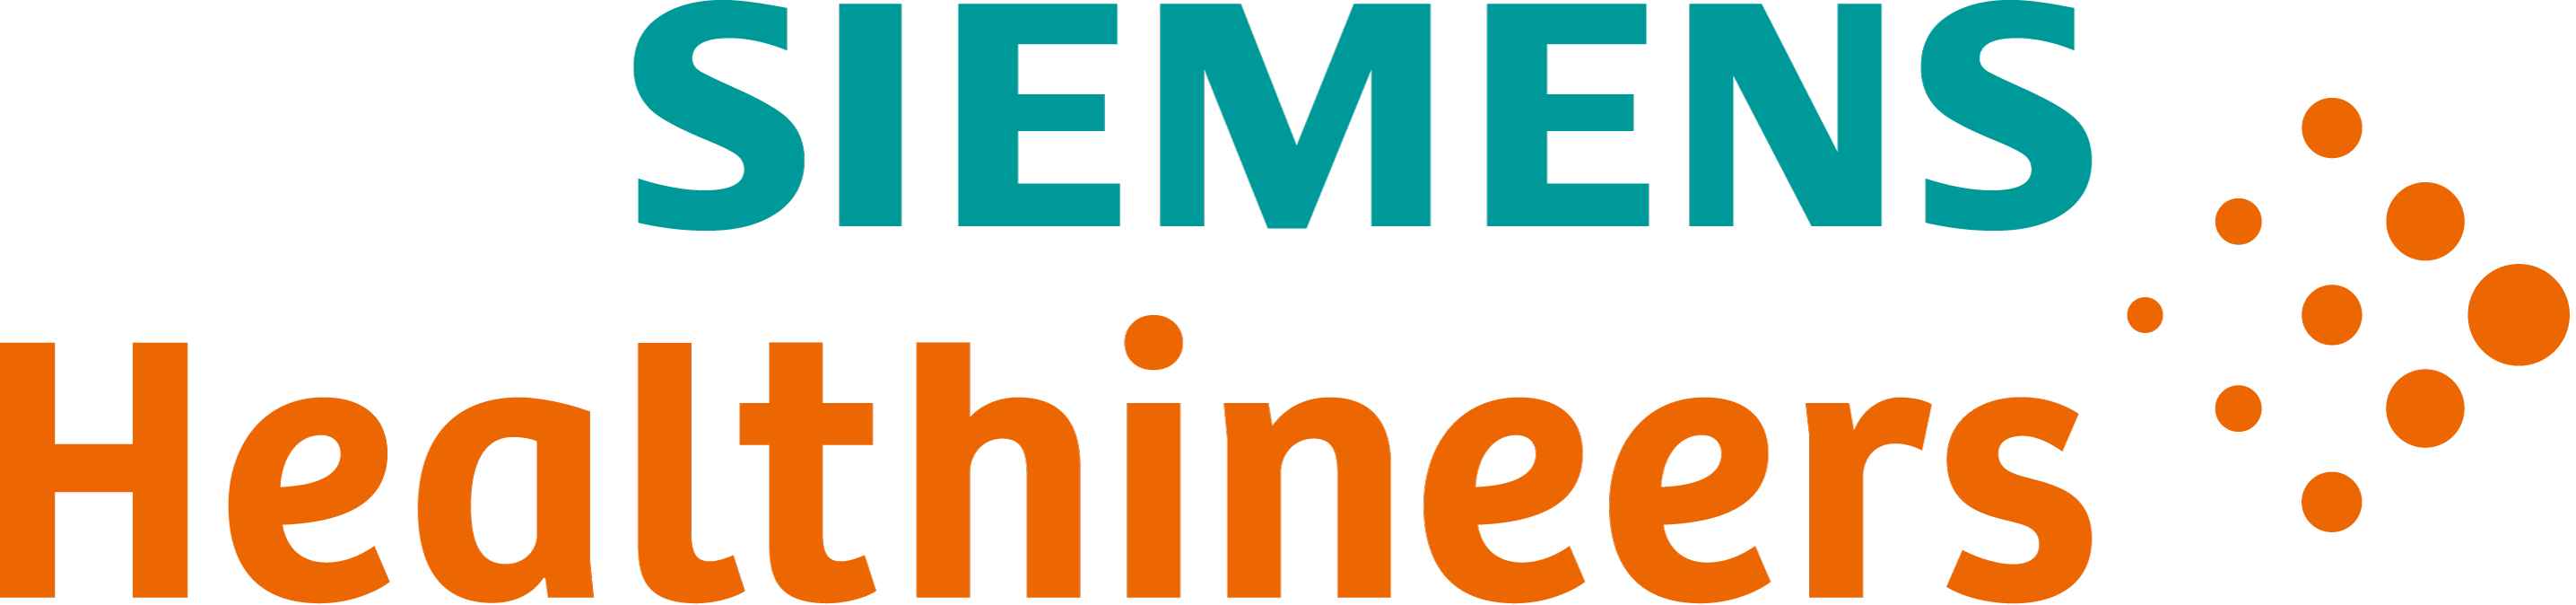 Siemens Healthineers Channel Page